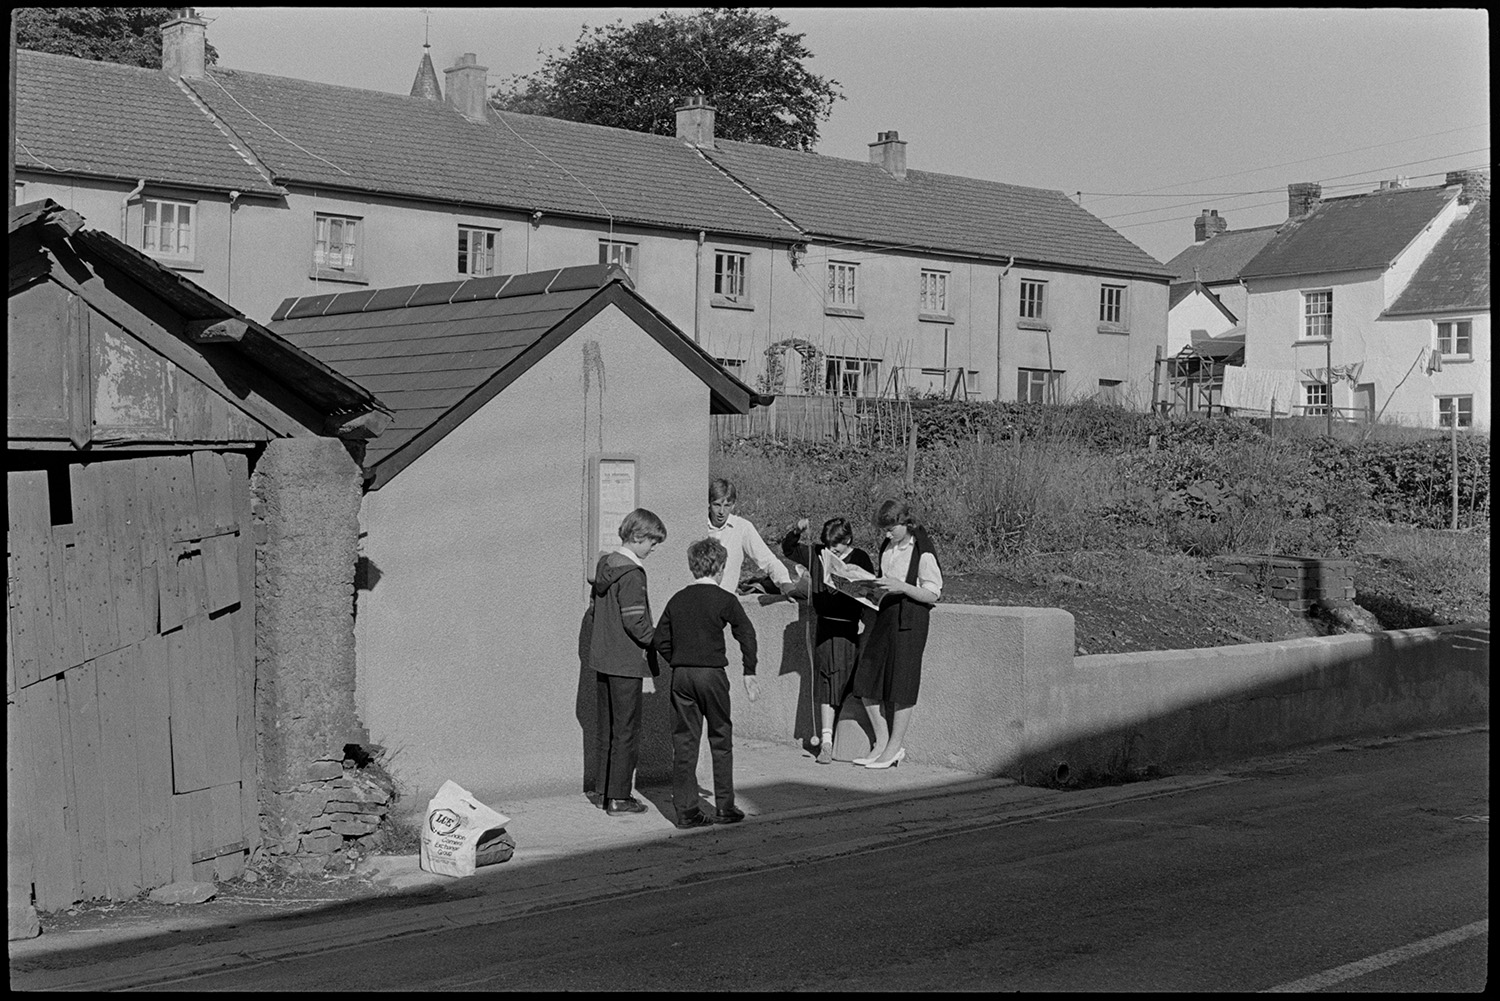 School children waiting for bus in village street beside old shed, garage.
[Five children waiting for a bus, standing by the bus shelter in Beaford. One girl is playing with a yoyo. Houses and gardens are visible in the background and next to the bus shelter is a garage with an old wooden door.]